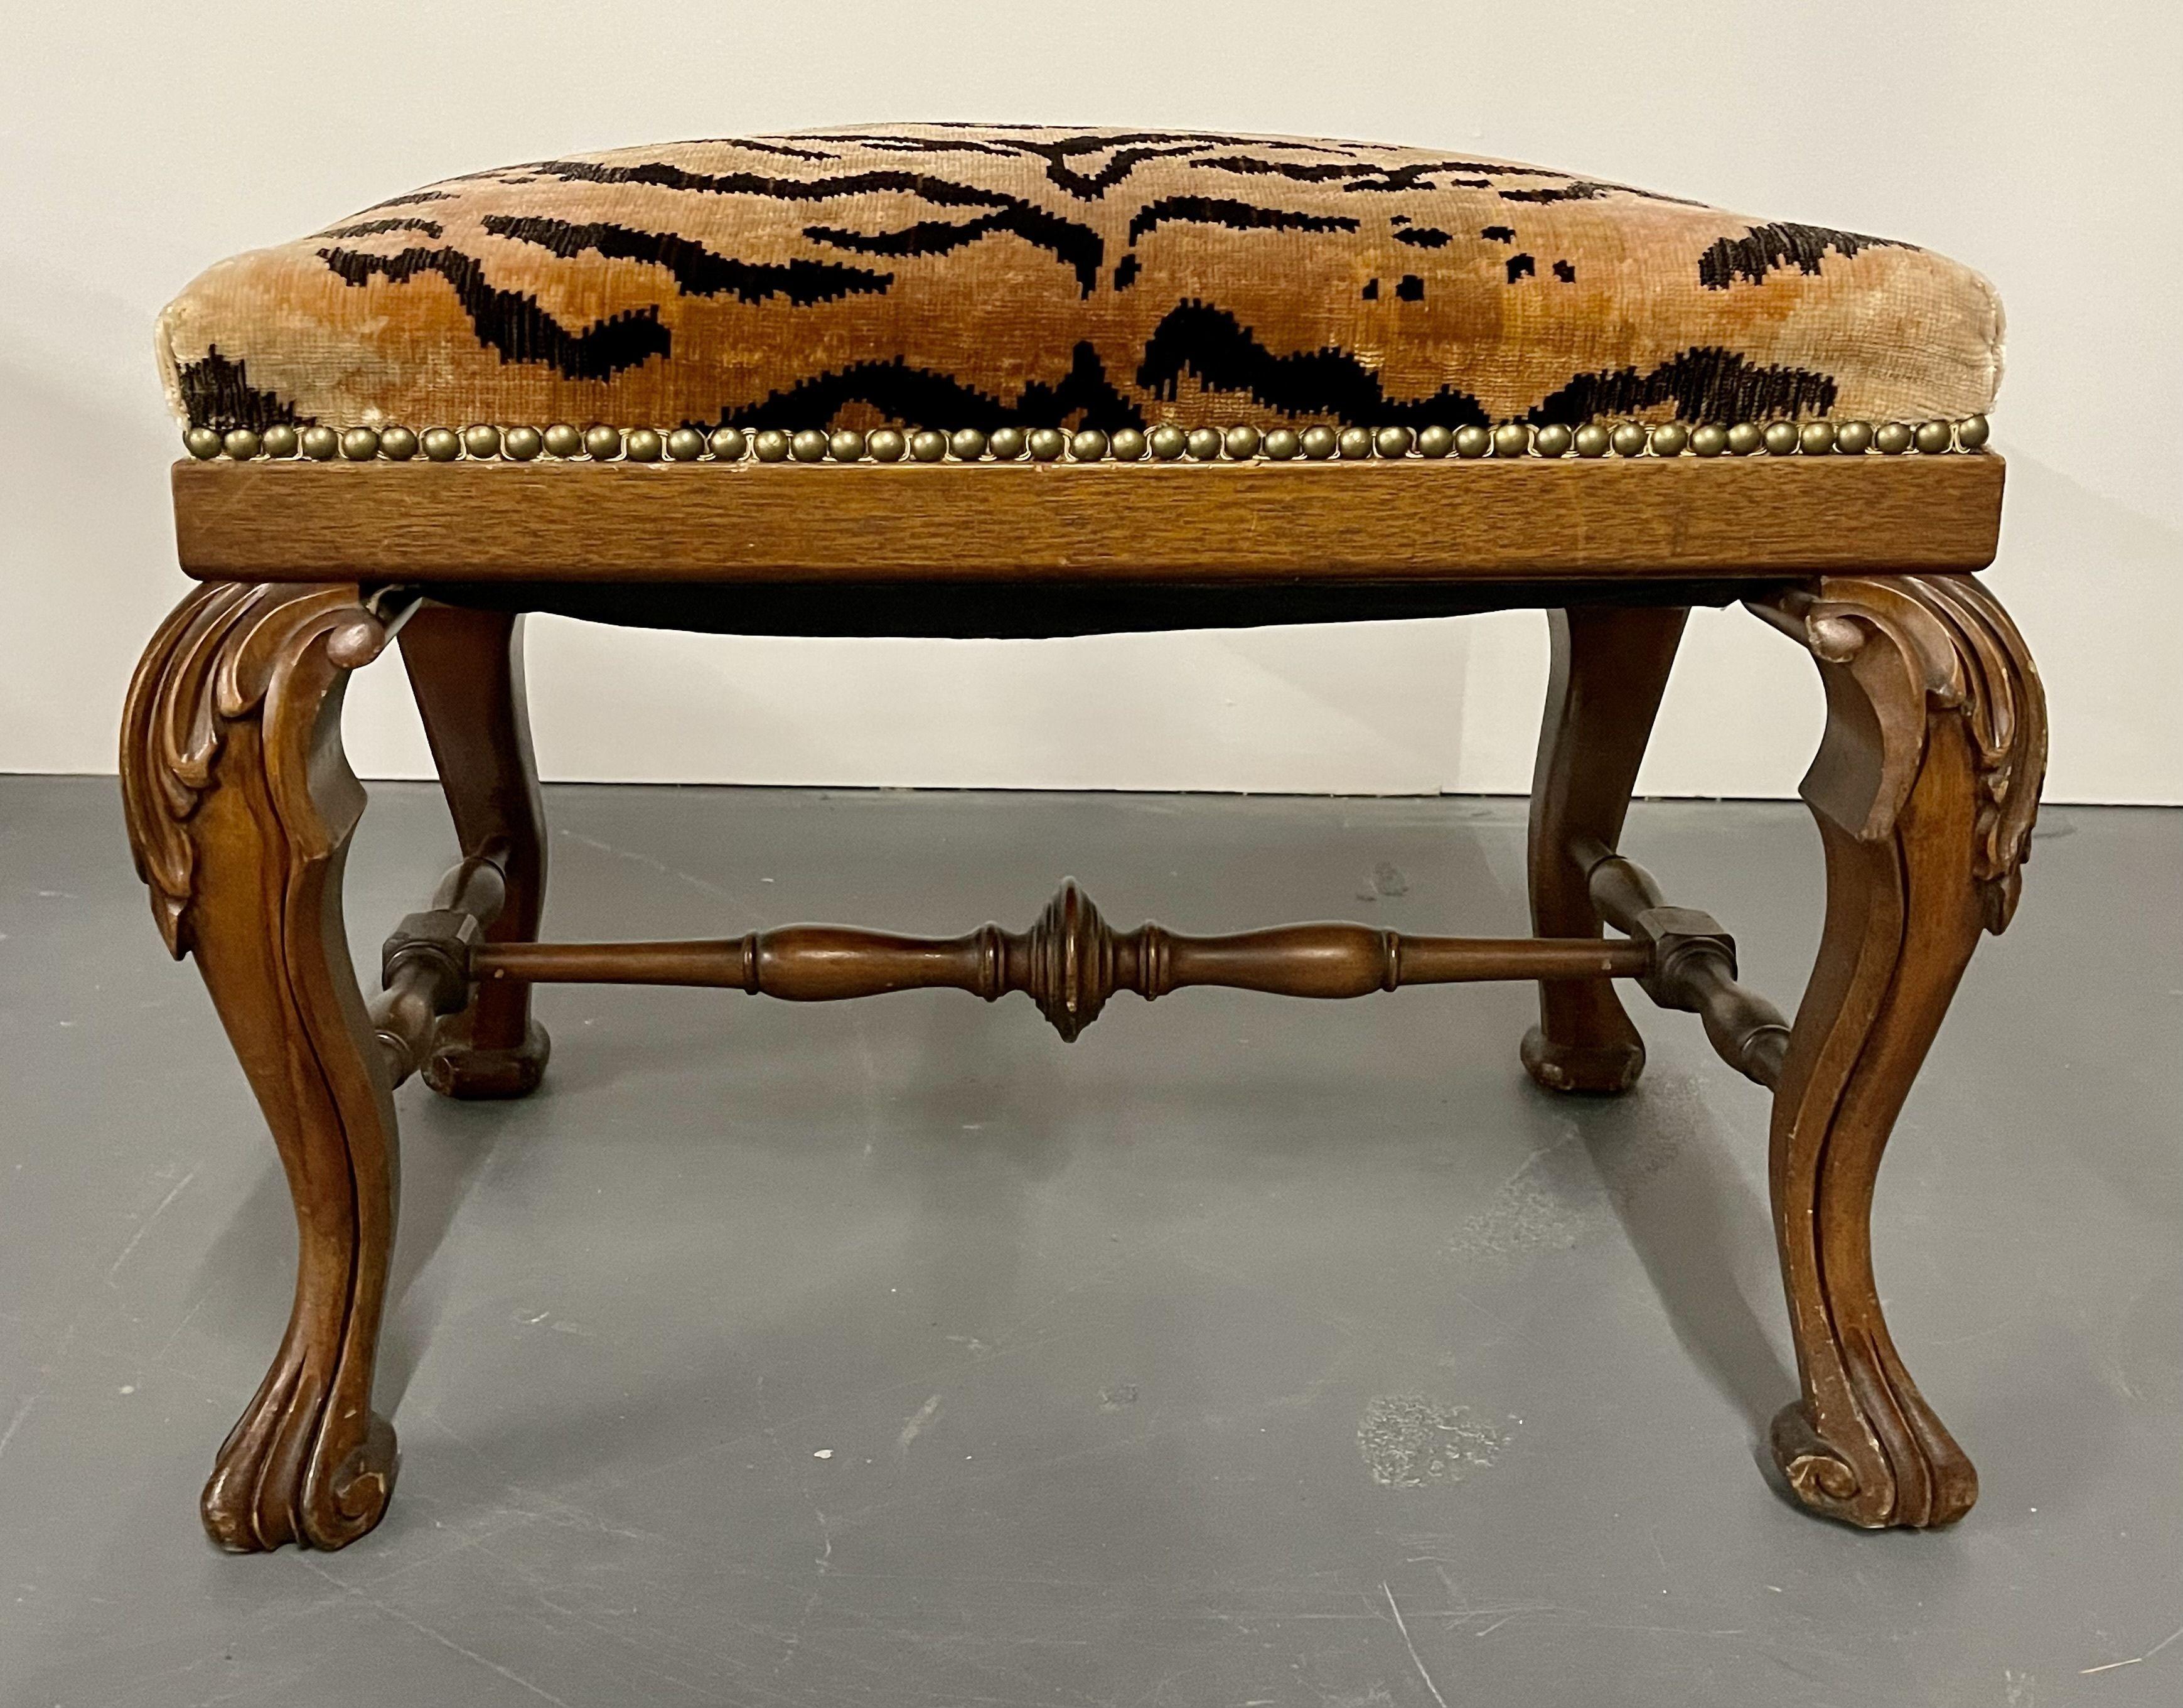 Chippindale style leopard upholstered foot stool or bench. Fine carved Claw Feet with Cabriole Legs stands this lovely finely upholstered bench.

Removed directly from Dr. Shawn Garber's home on the Gold Coast of Long Island. Part of an extensive